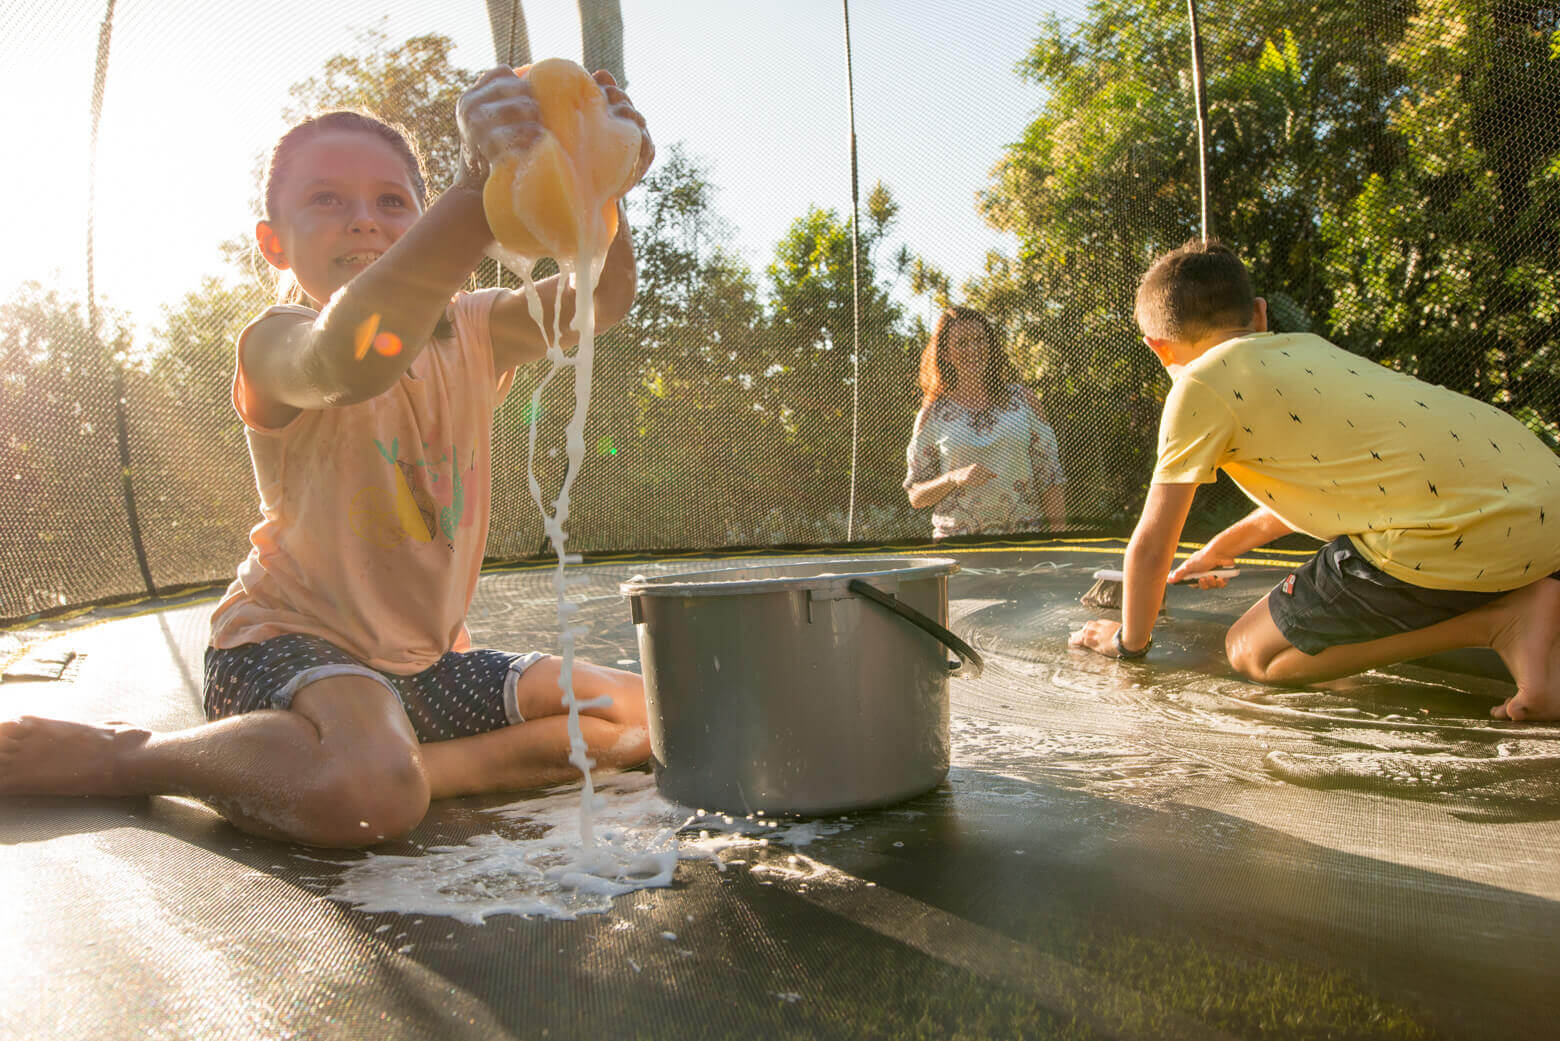 A girl and boy cleaning a trampoline mat with soap and water while their mom watches